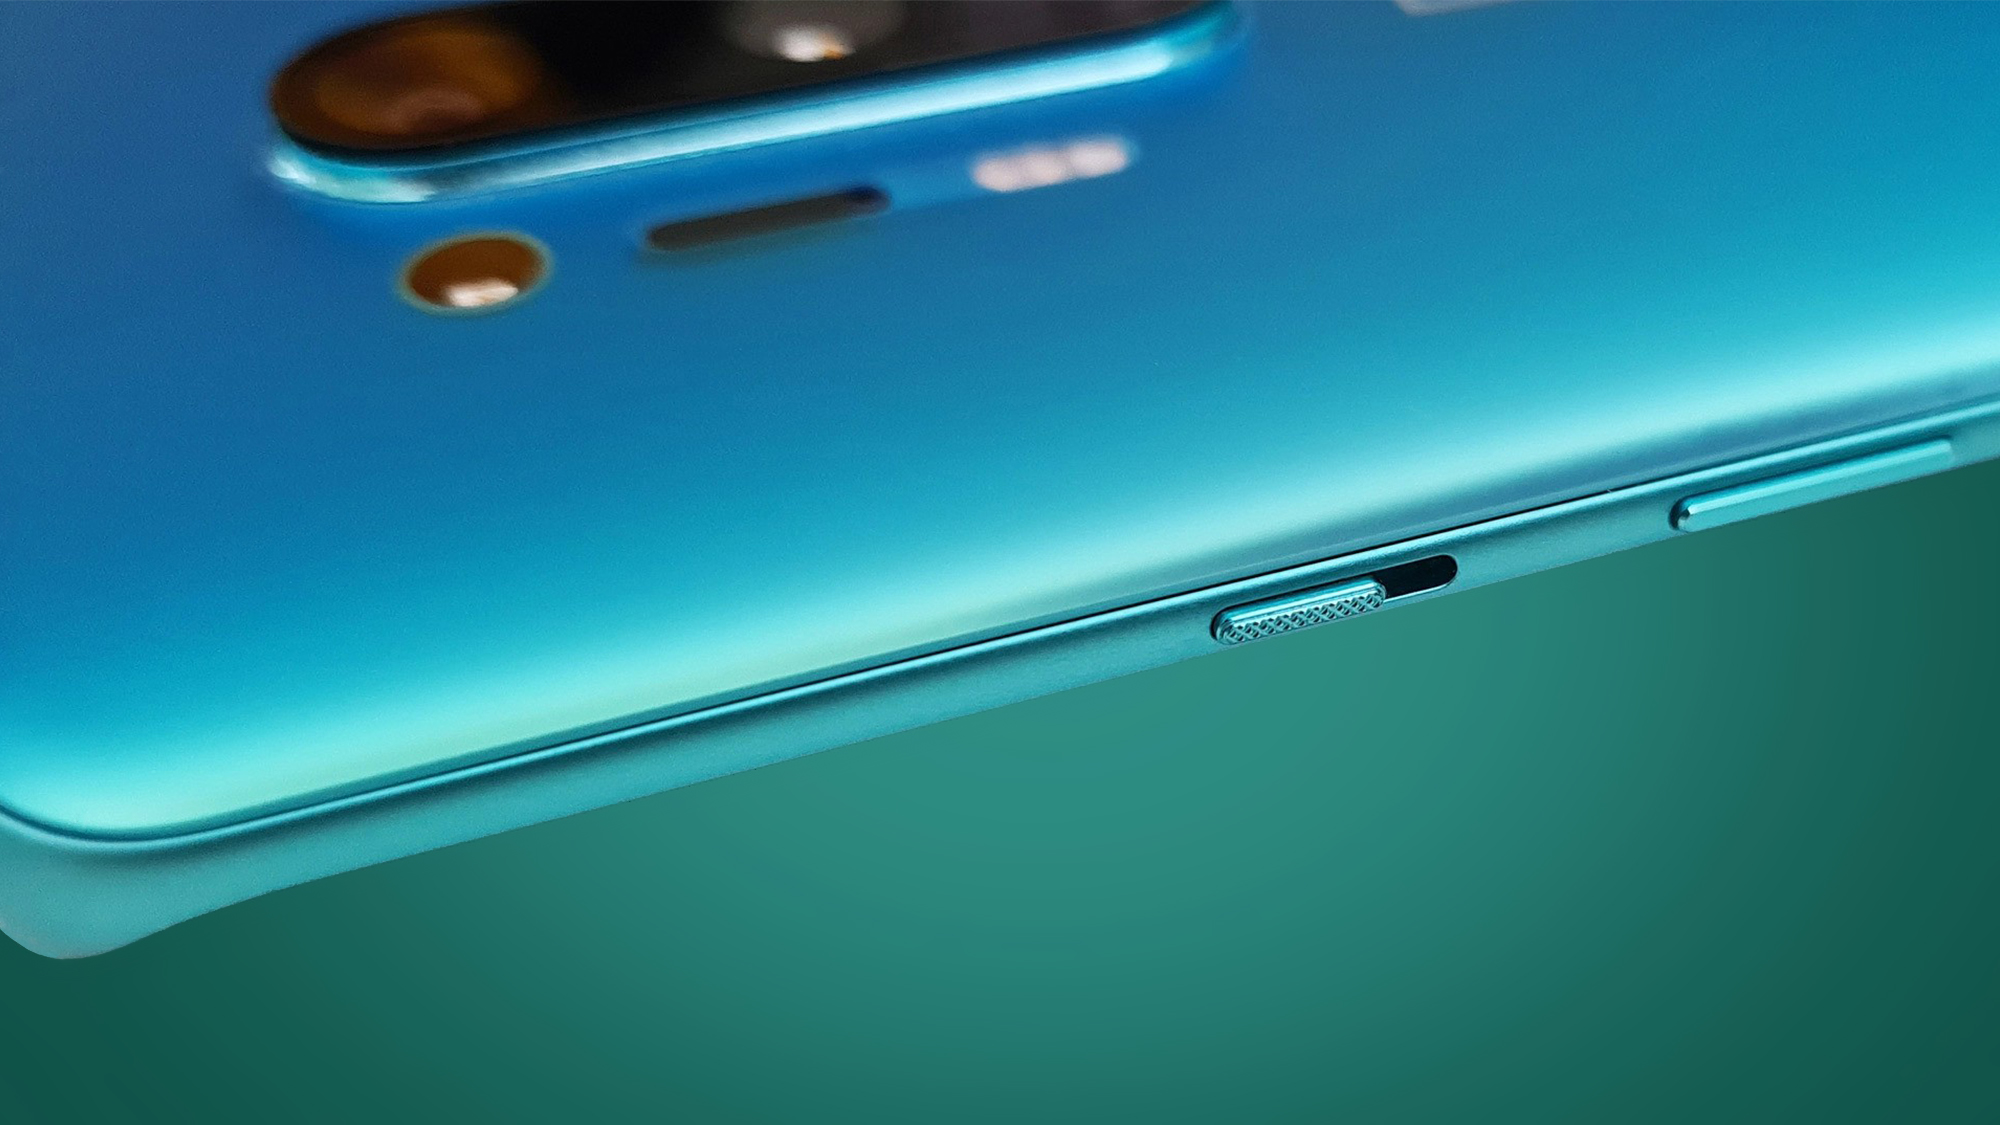 OnePlus 8 Pro alert slider closeup - PS cleaned up